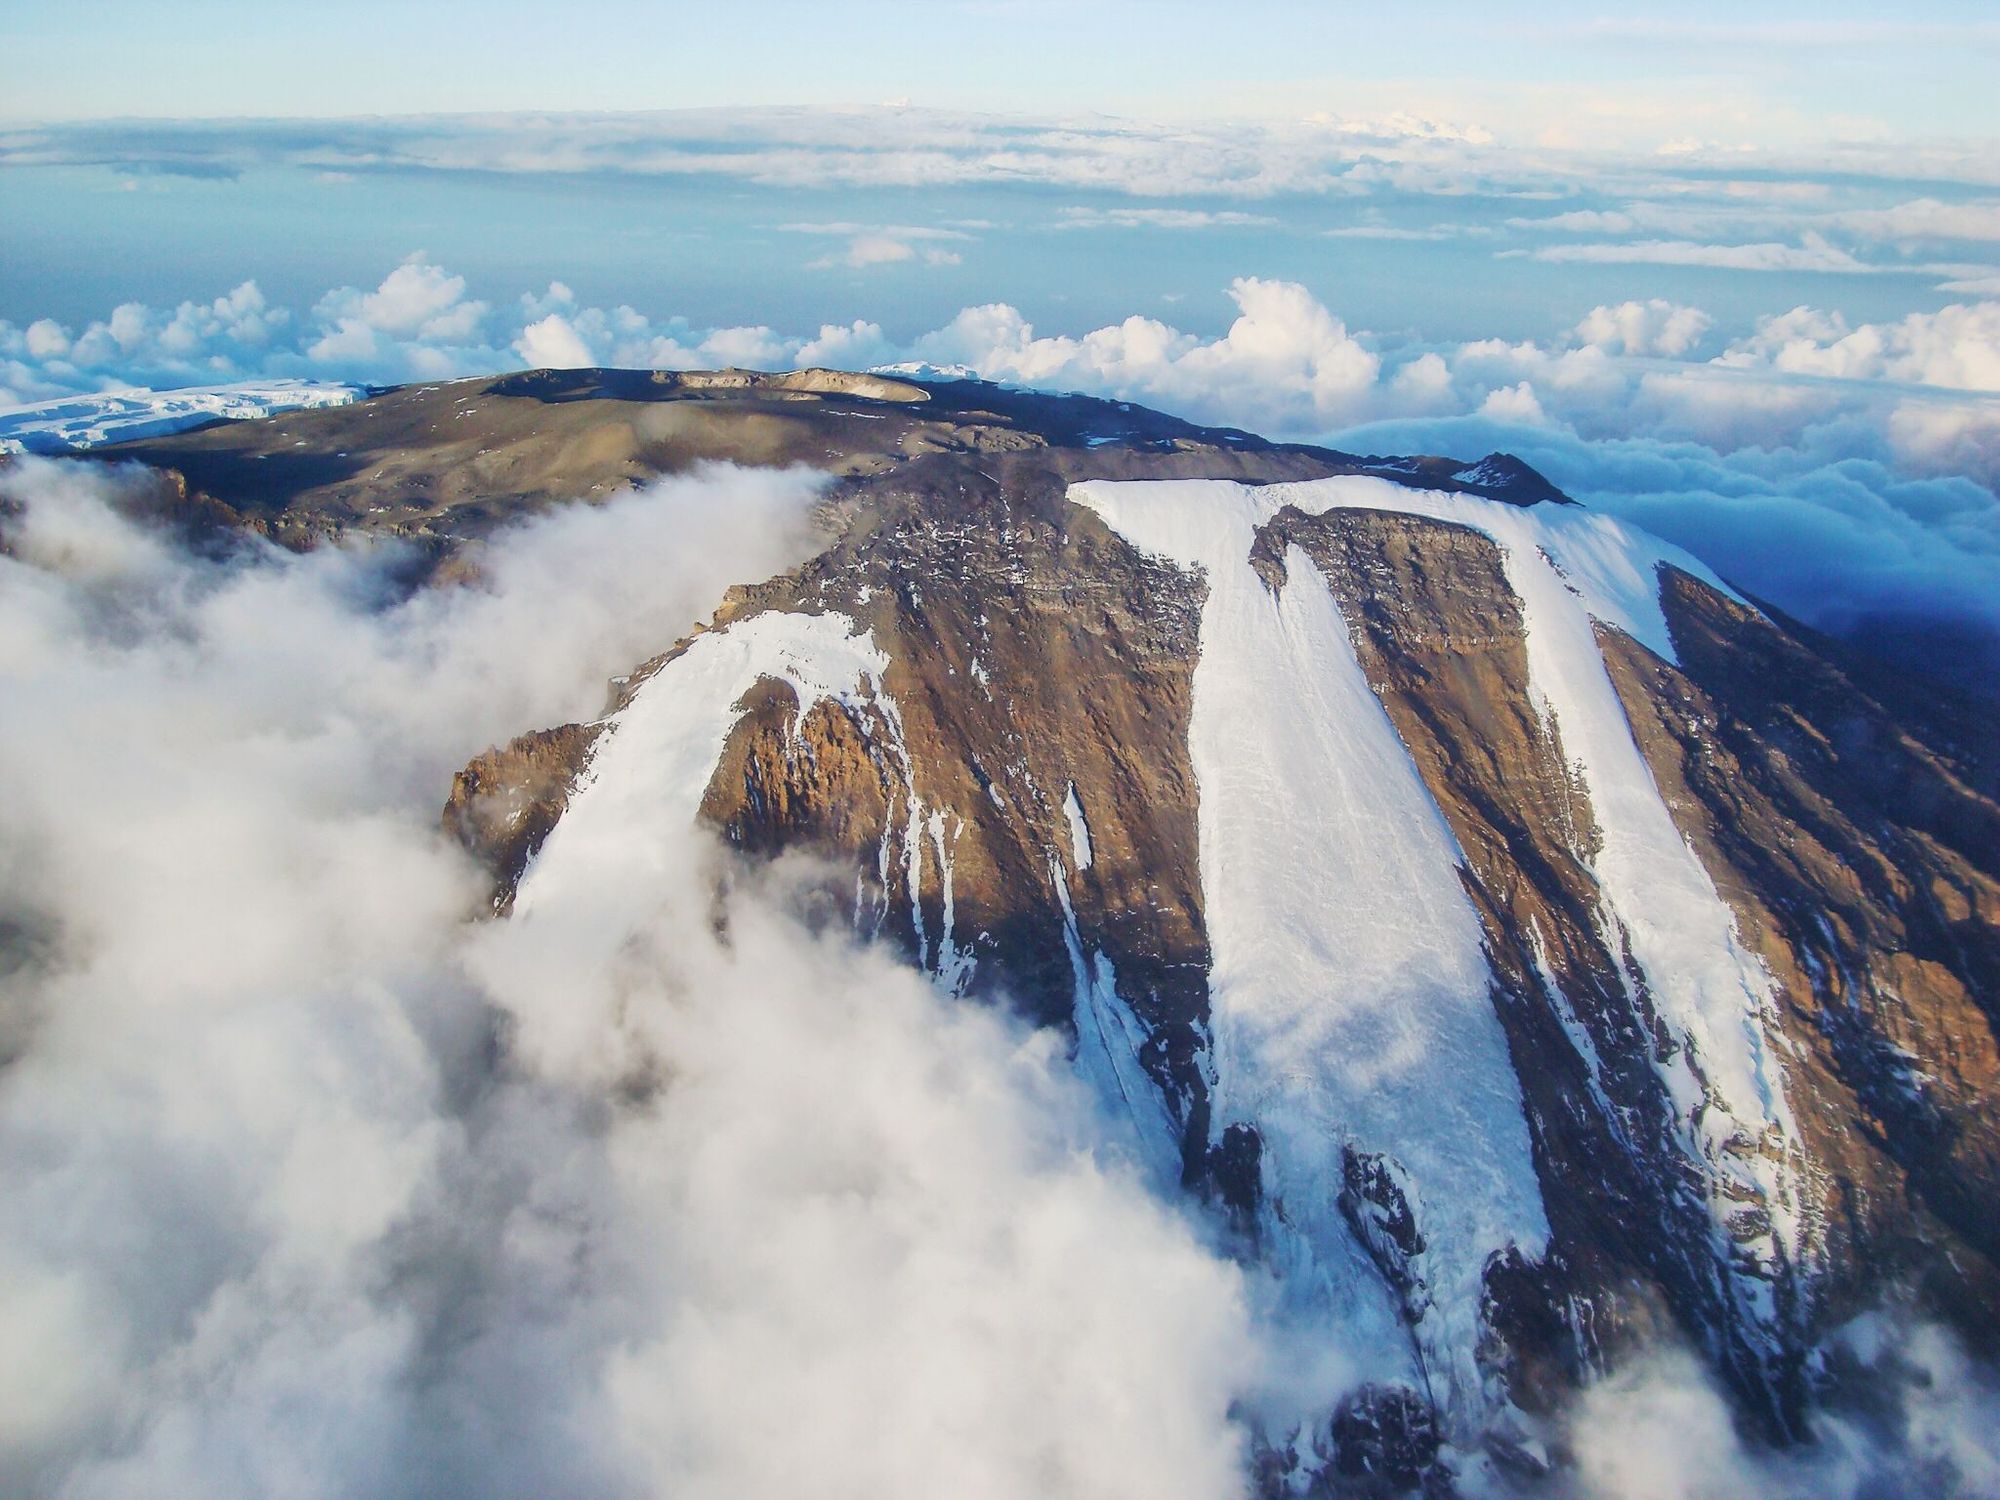 The summit of Kilimanjaro, surrounded by cloud